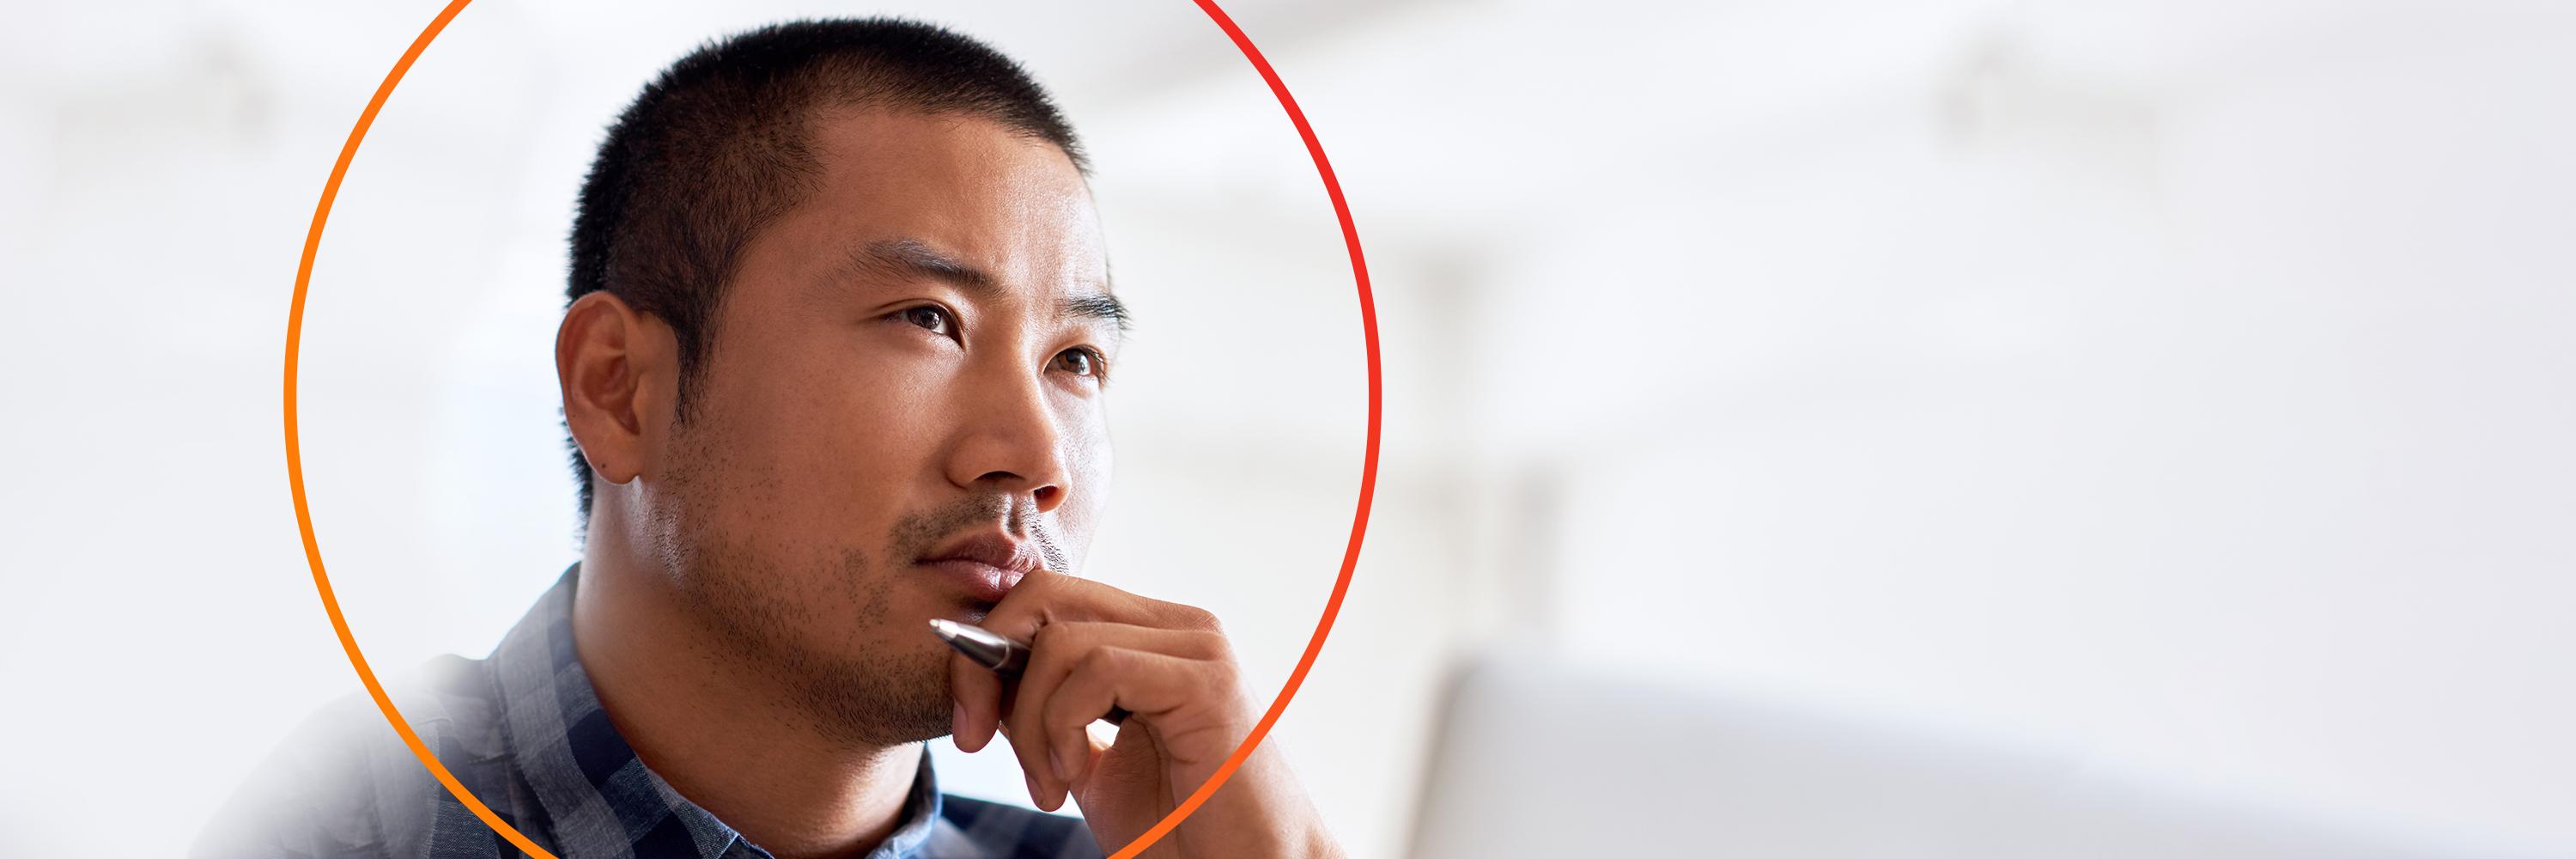 Asian male in thinking pose with orange circle